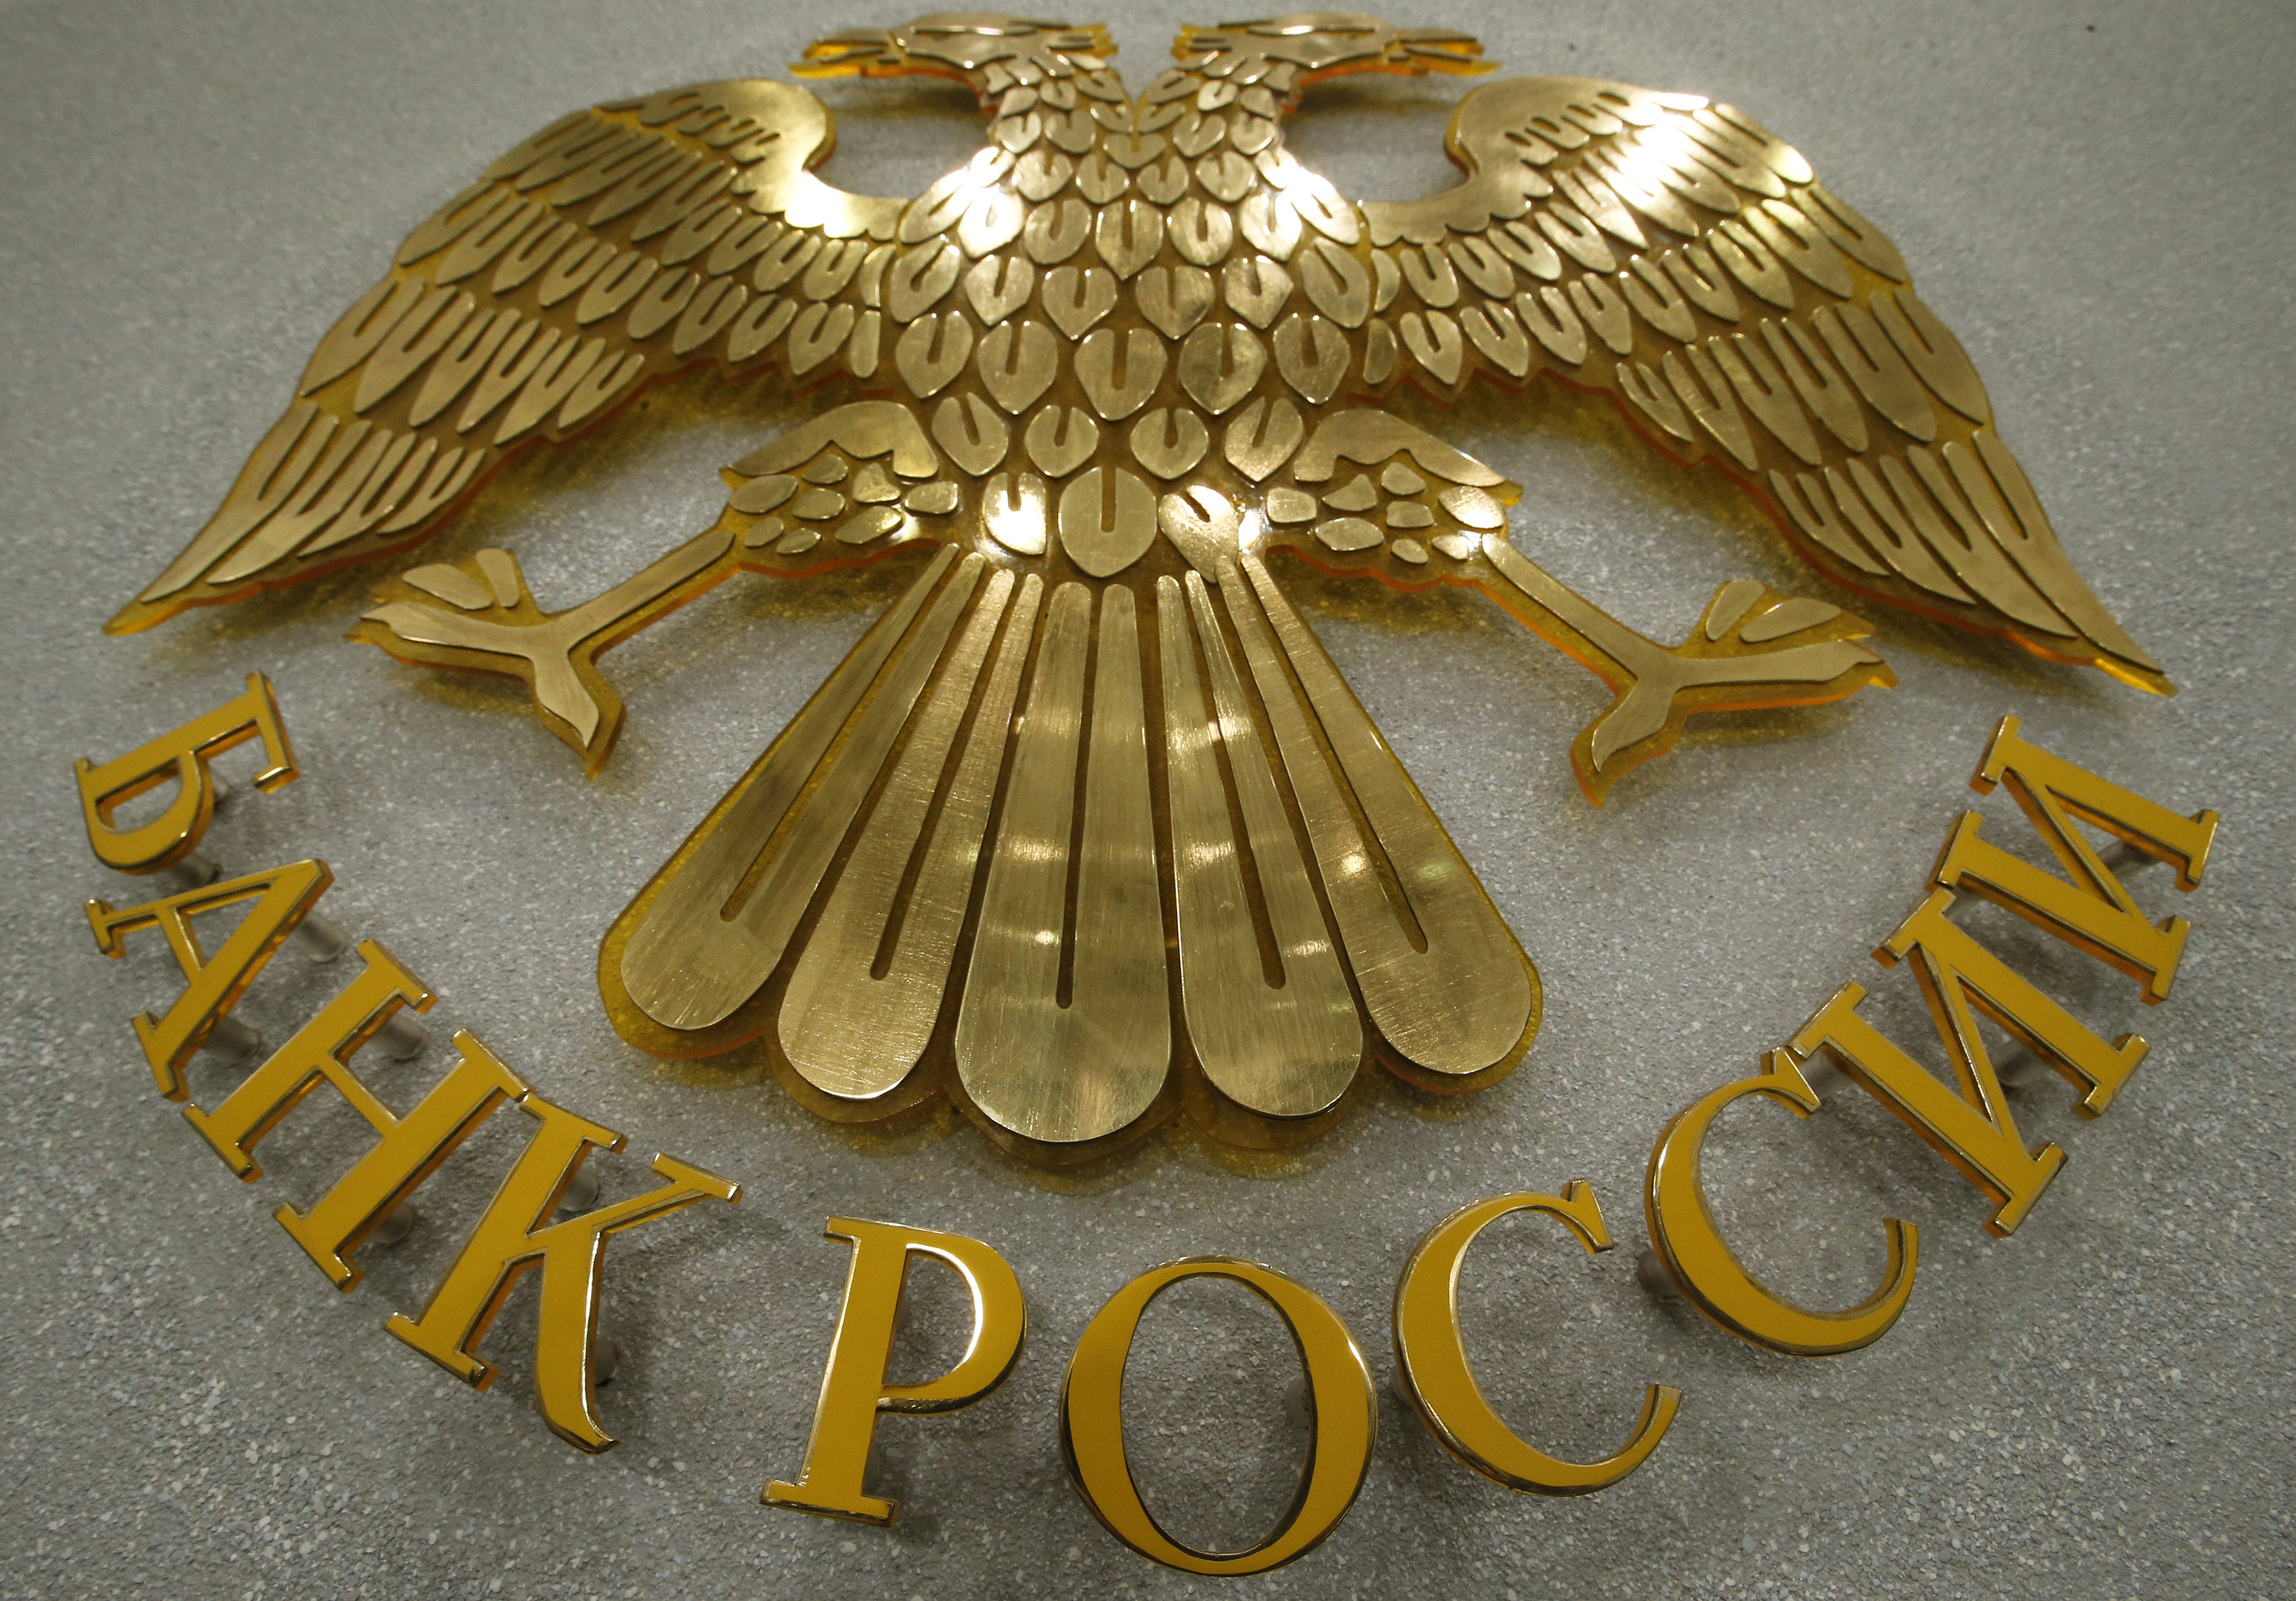 A coat of arms of the Russia's Central Bank is pictured in the bank's press room in Moscow, March 13, 2015. The Russian central bank cut its main lending rate on March 13, for the second time this year, putting concerns about the declining economy before worries about high inflation. REUTERS/Sergei Karpukhin (RUSSIA - Tags: BUSINESS LOGO) - RTR4T8DC